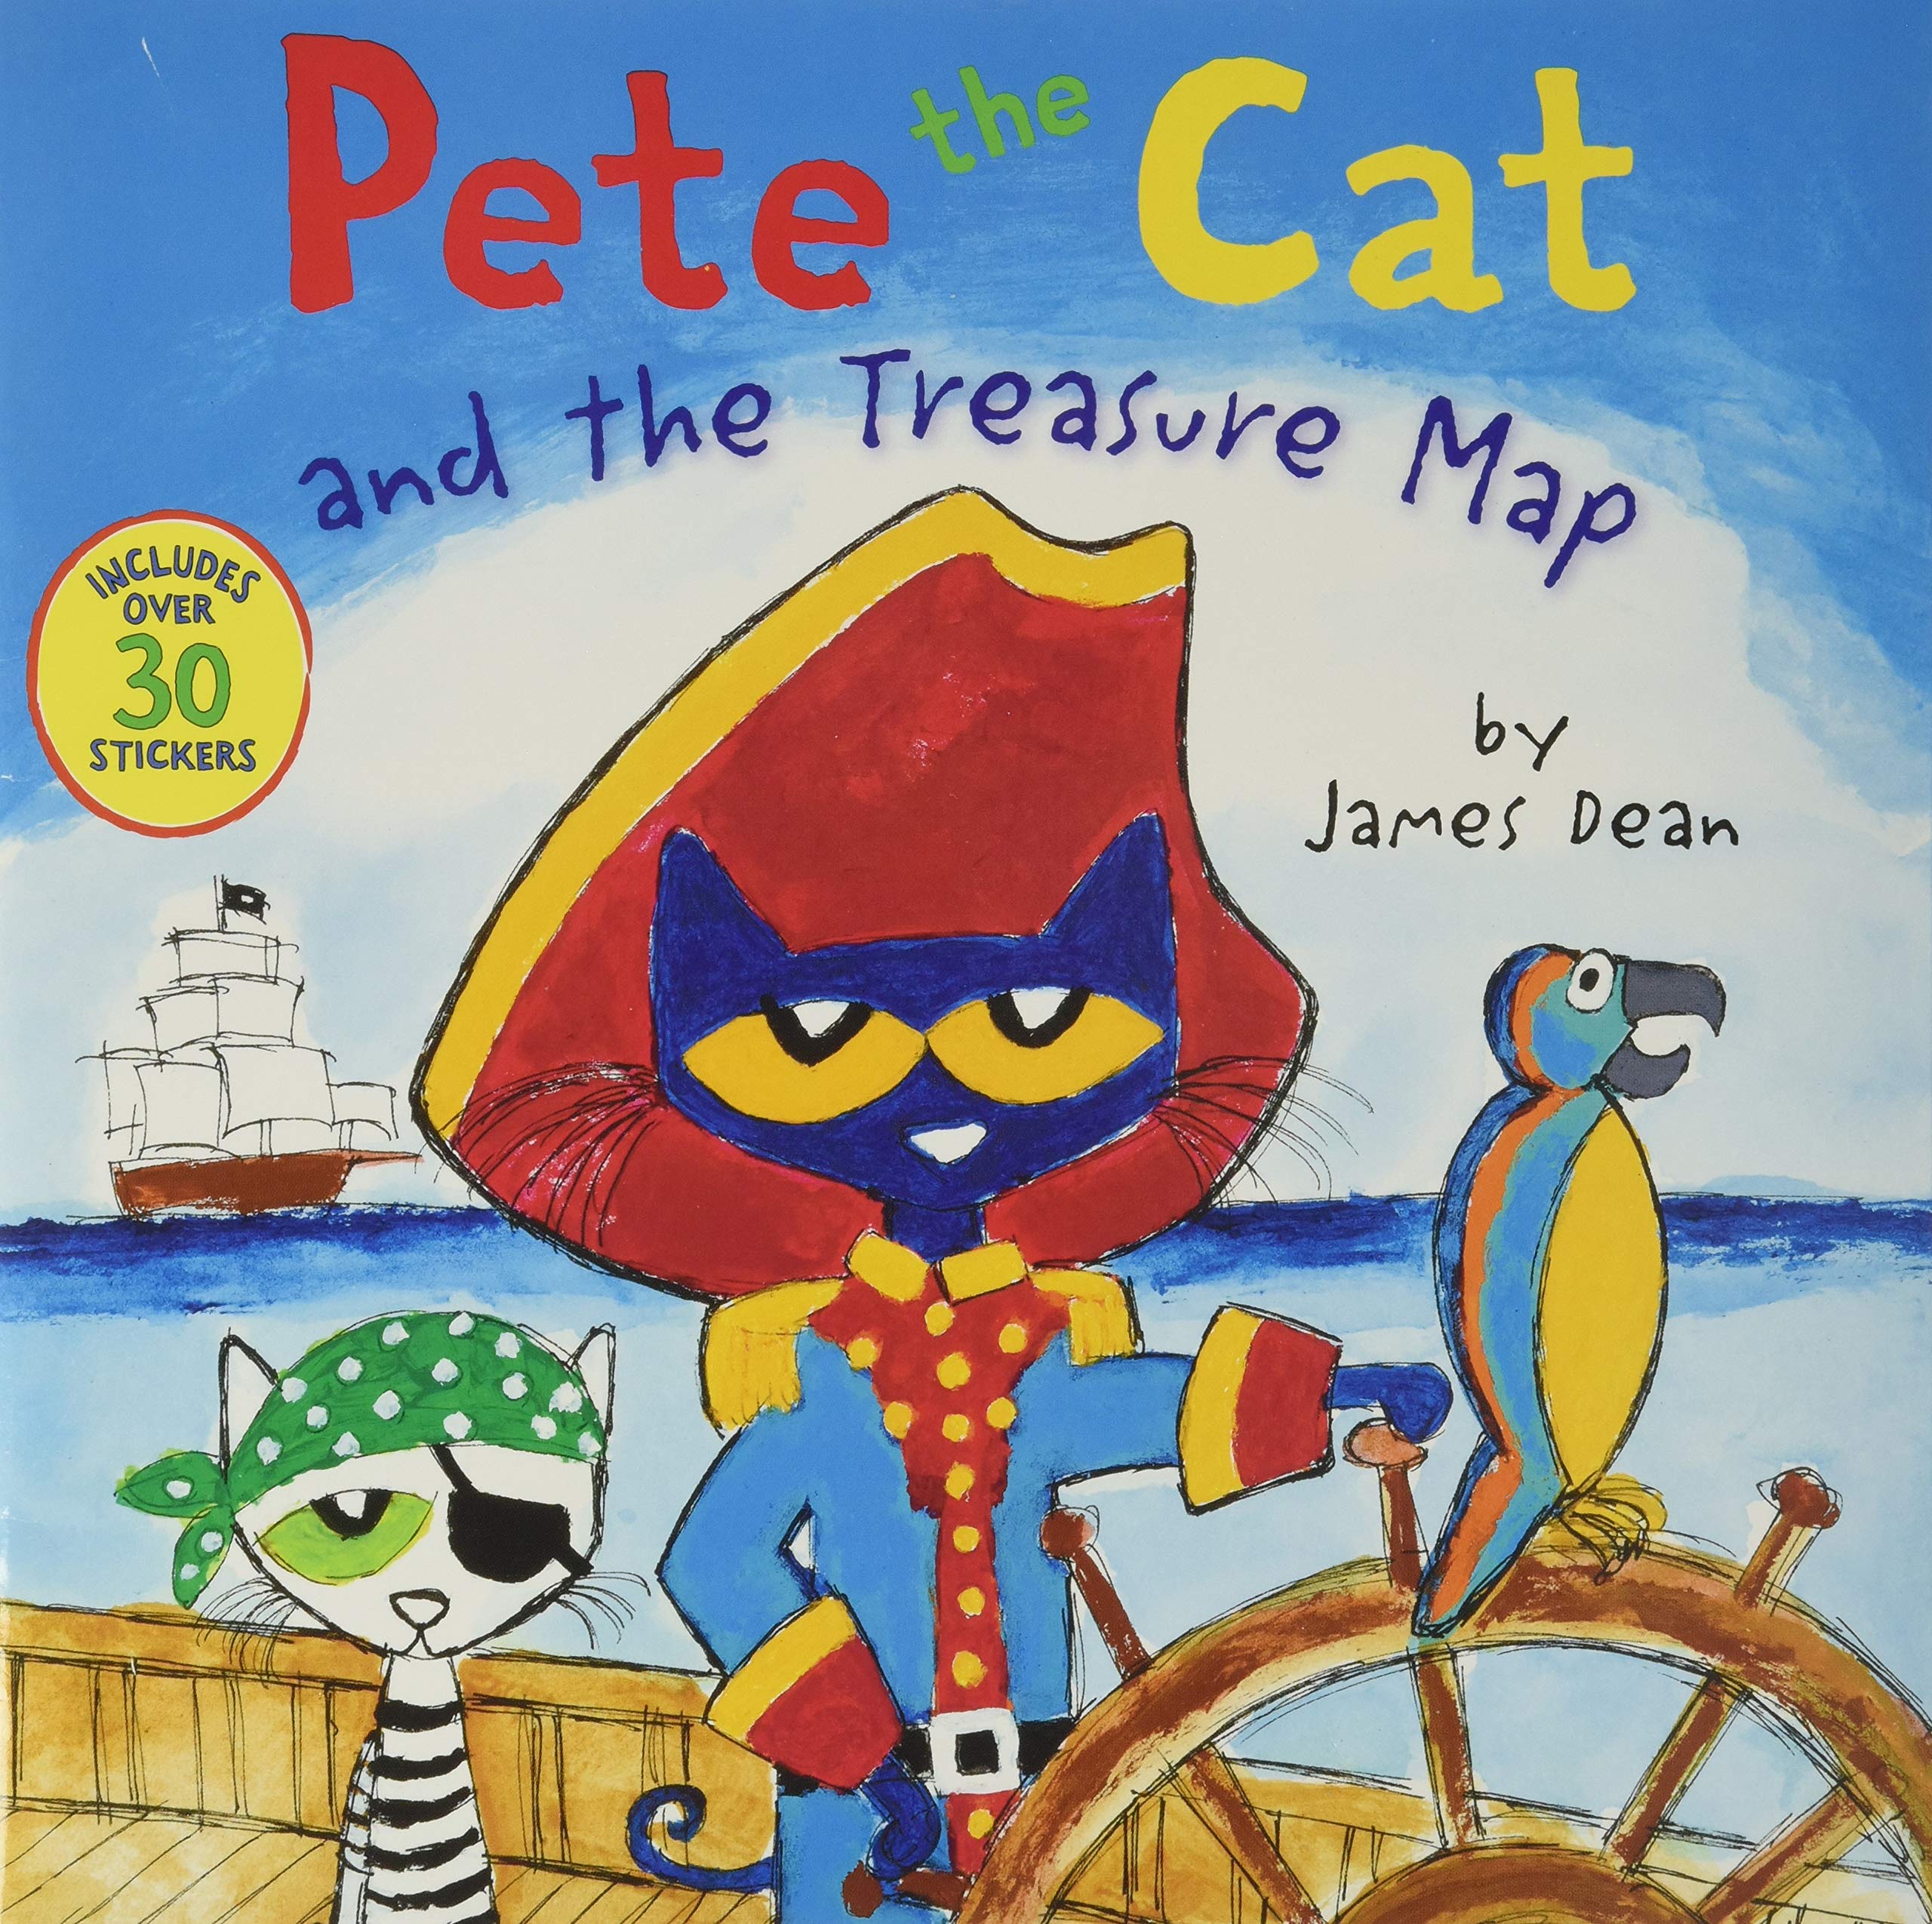 speech and language teaching concepts for Pete the cat and the treasure map in speech therapy